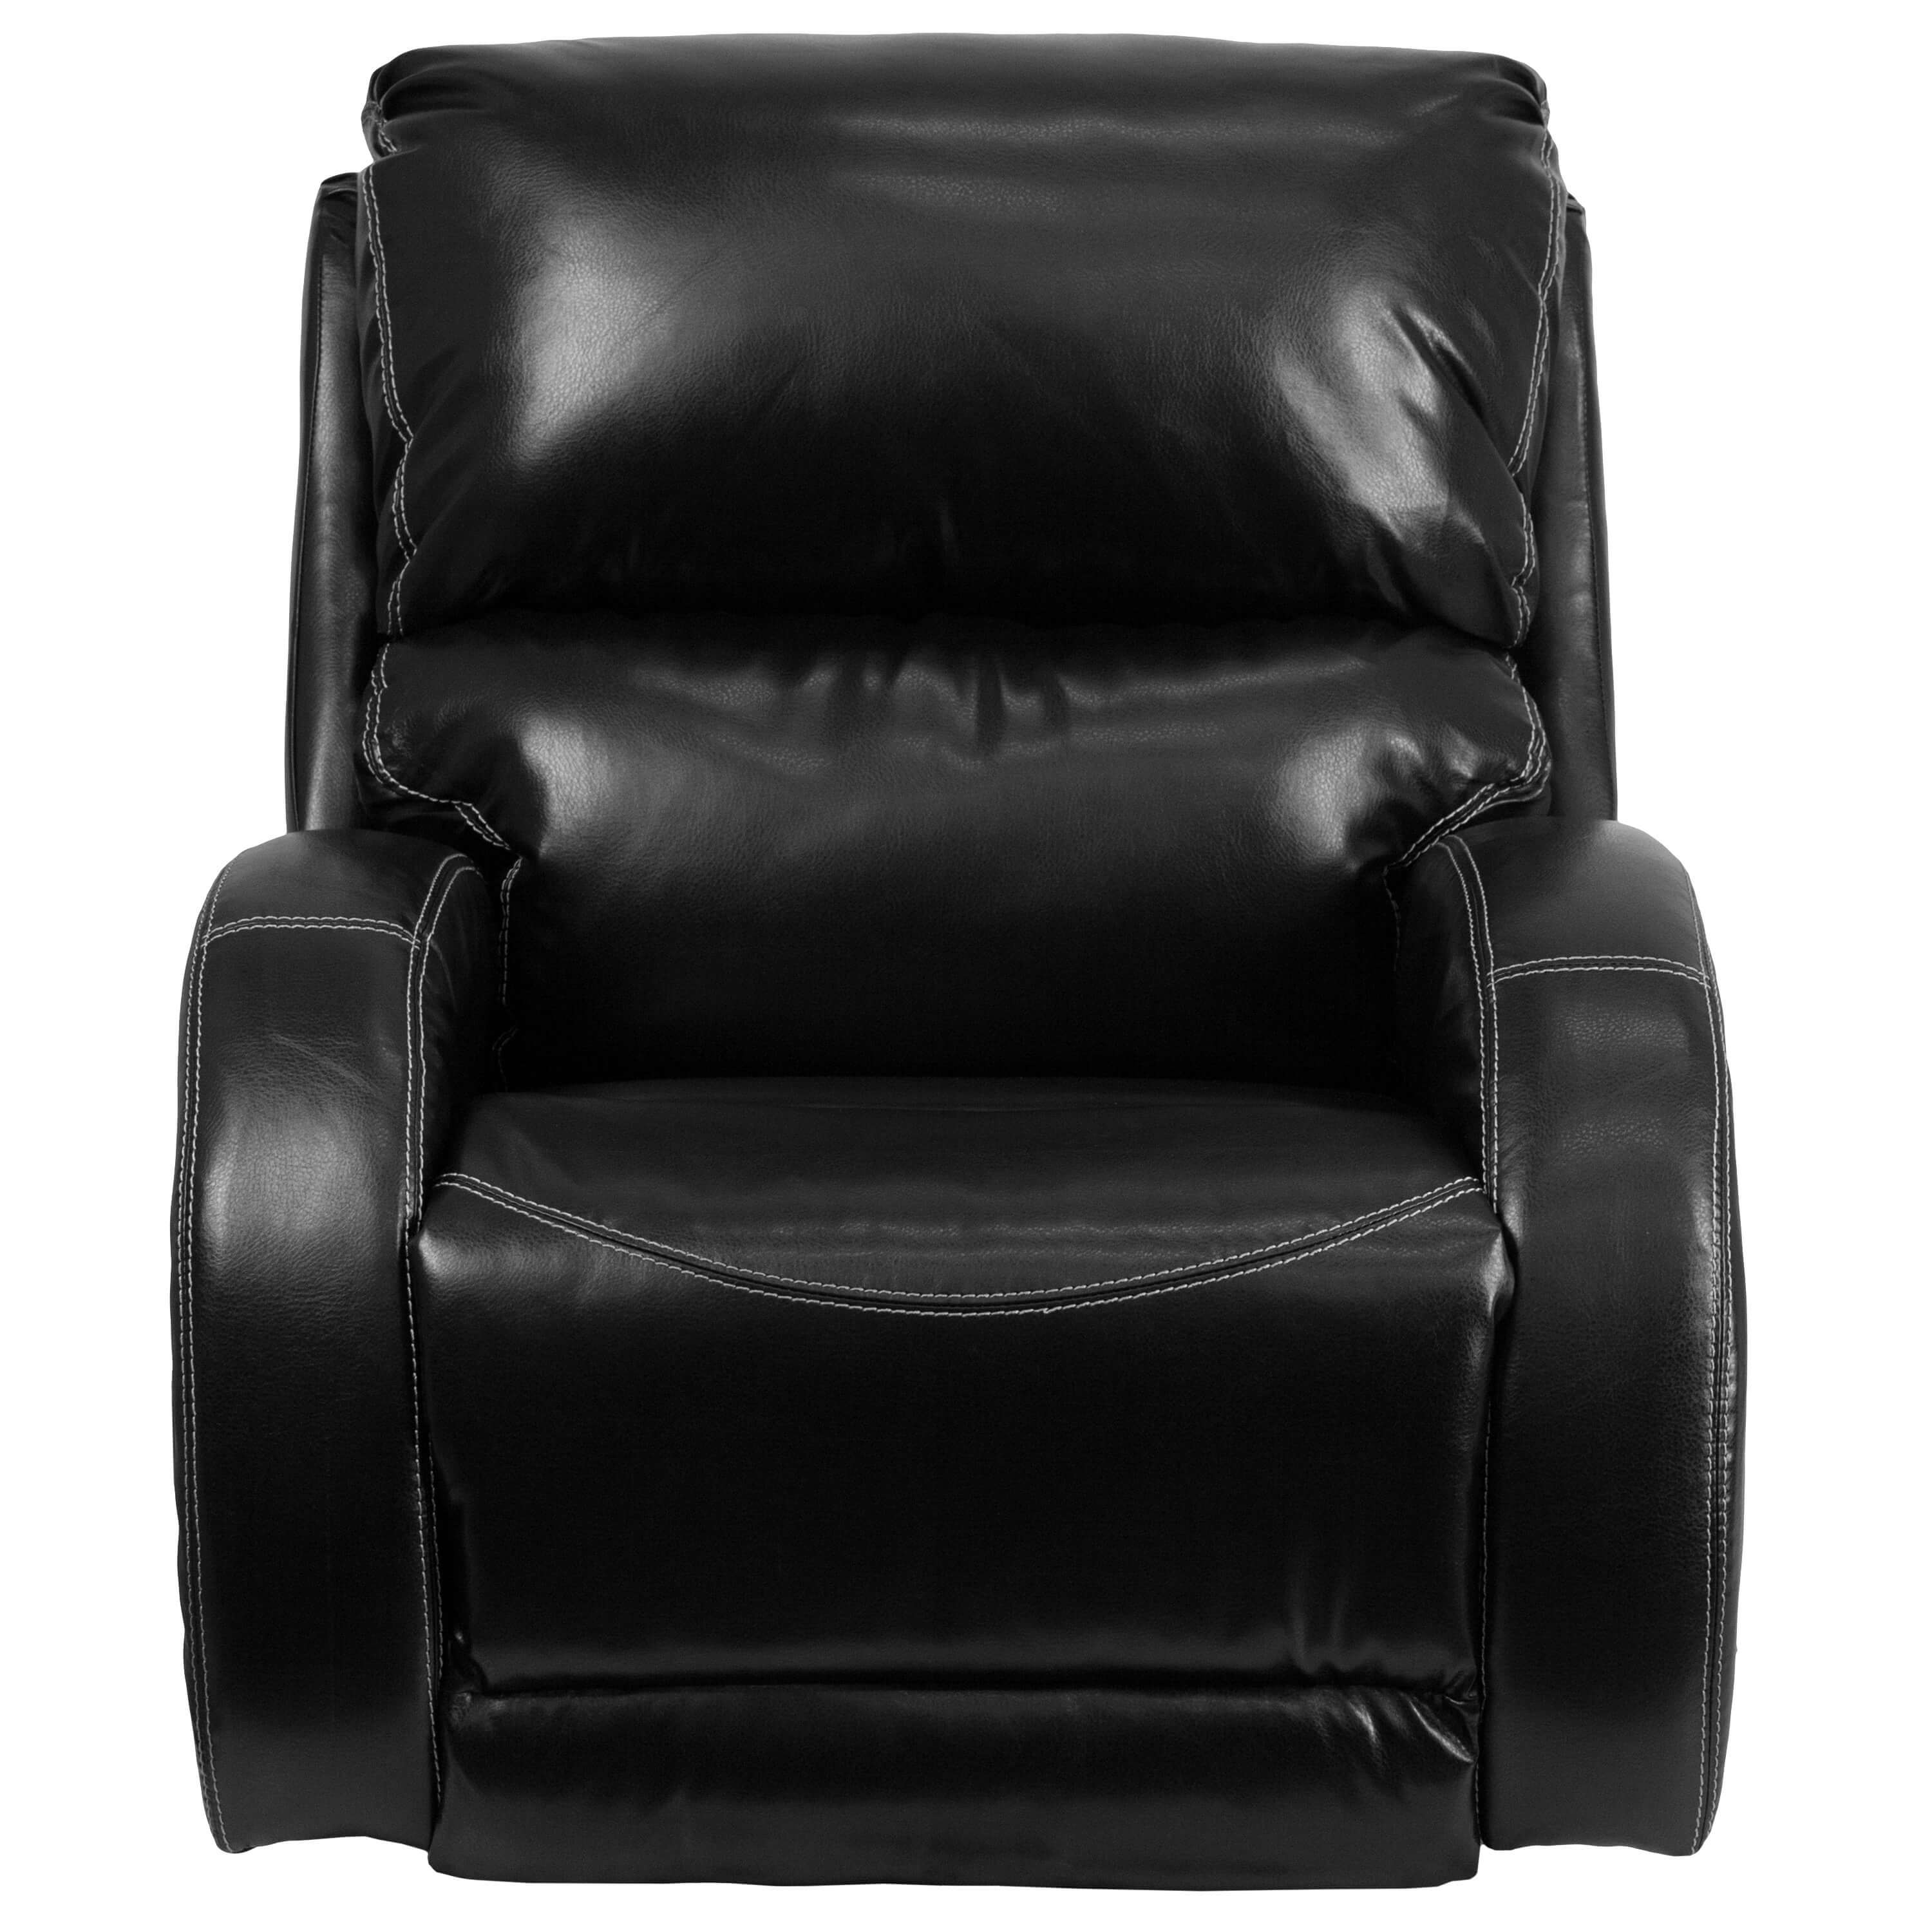 Leather rocking recliner front view